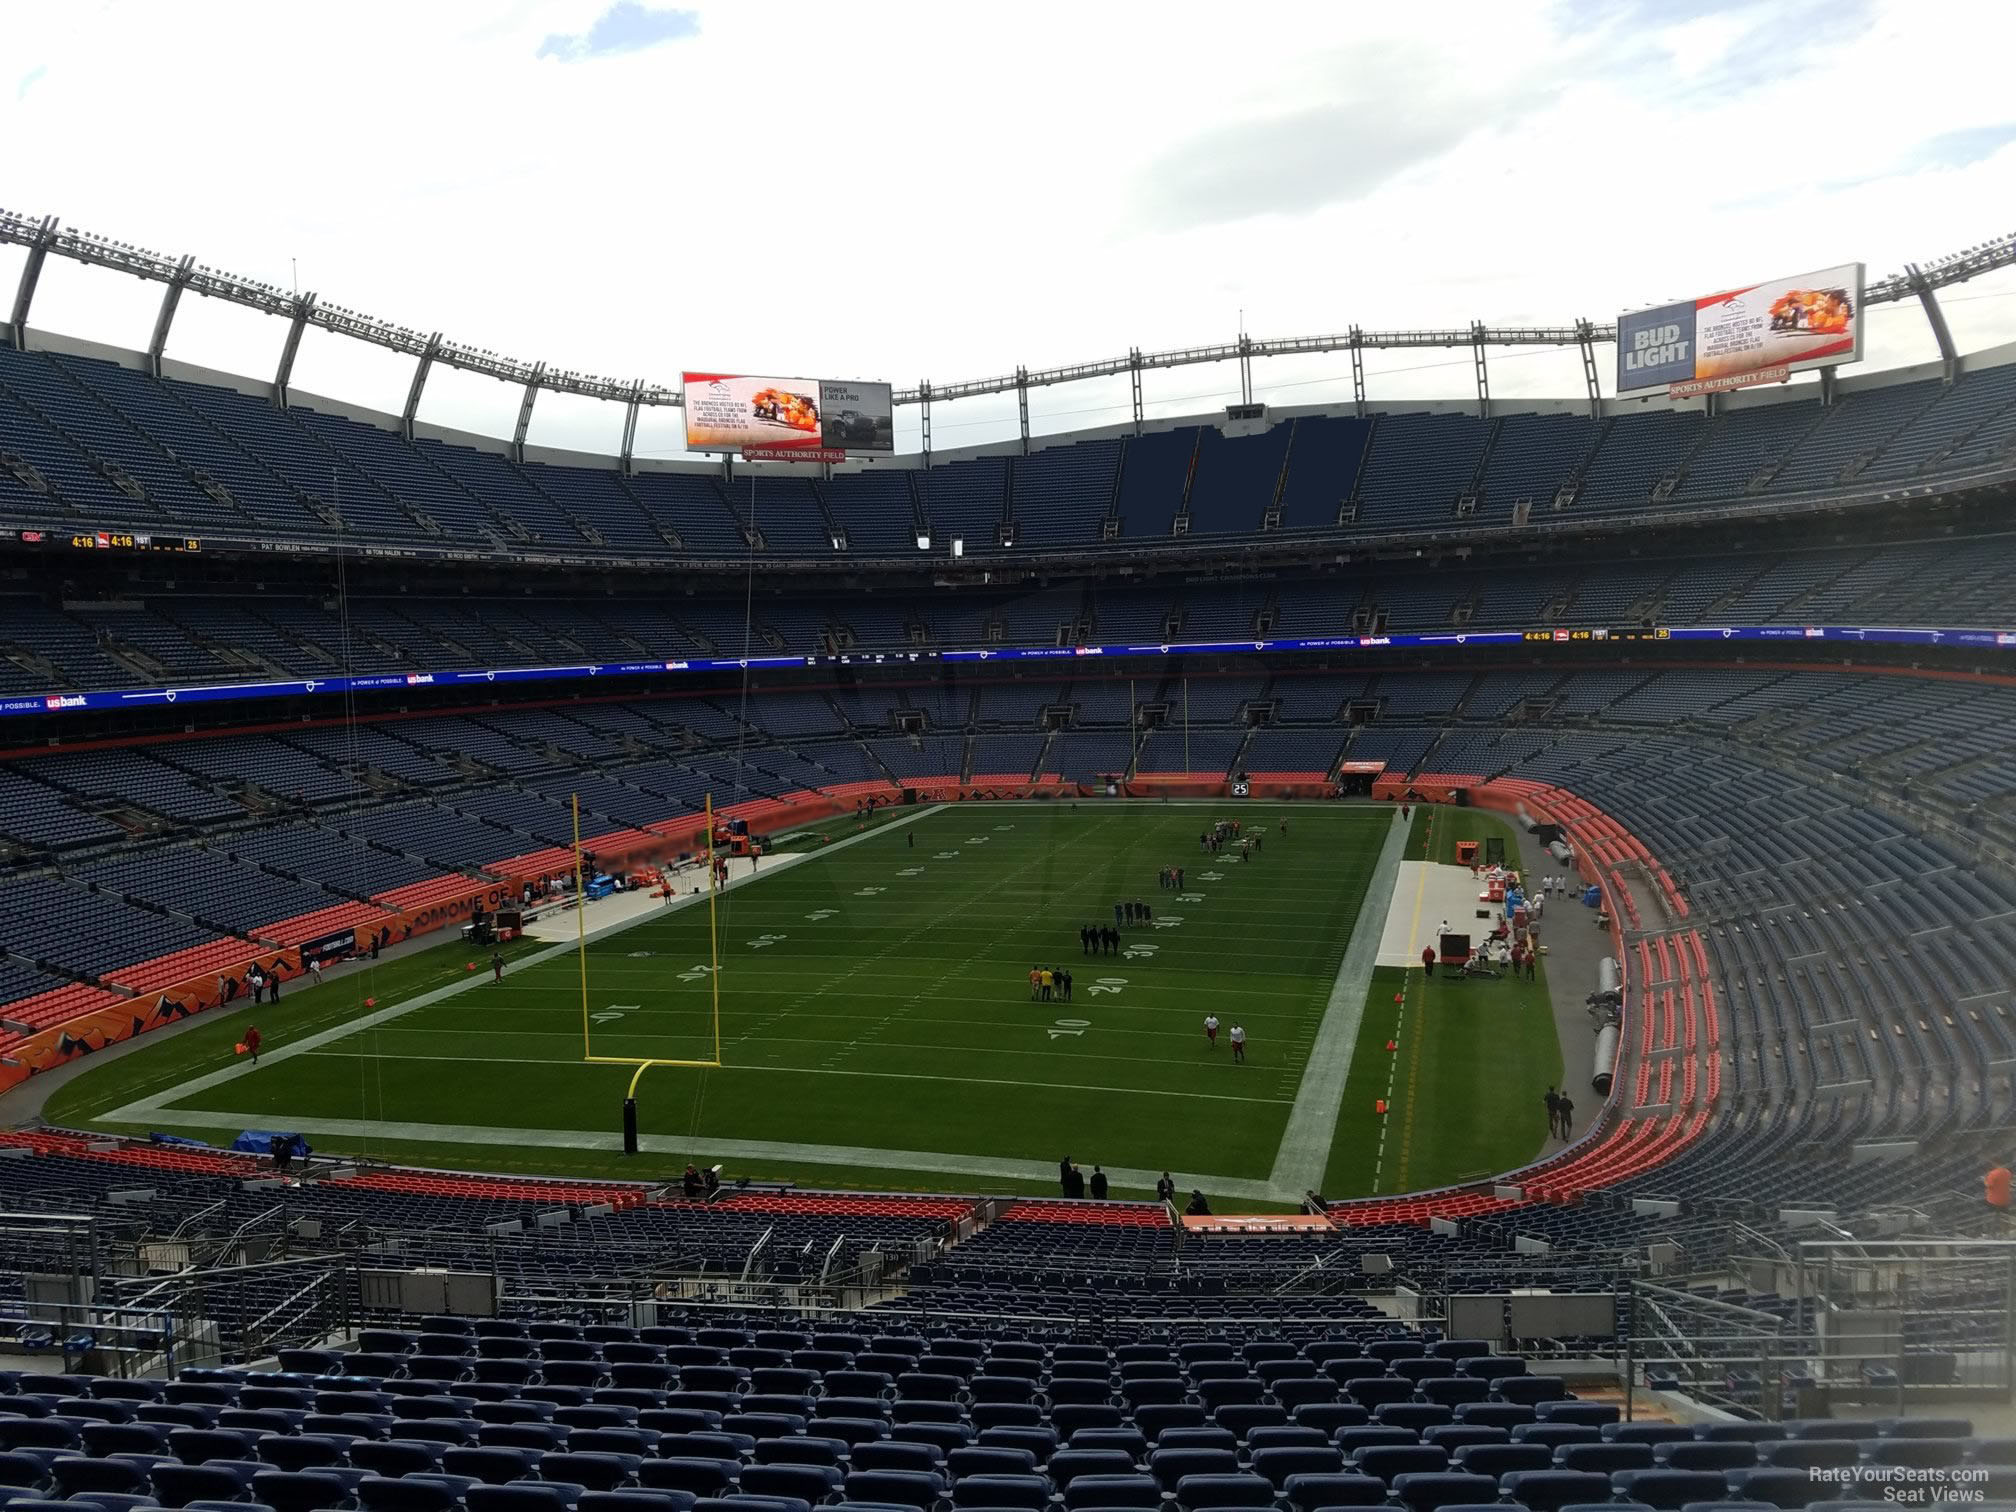 section 230, row 16 seat view  - empower field (at mile high)